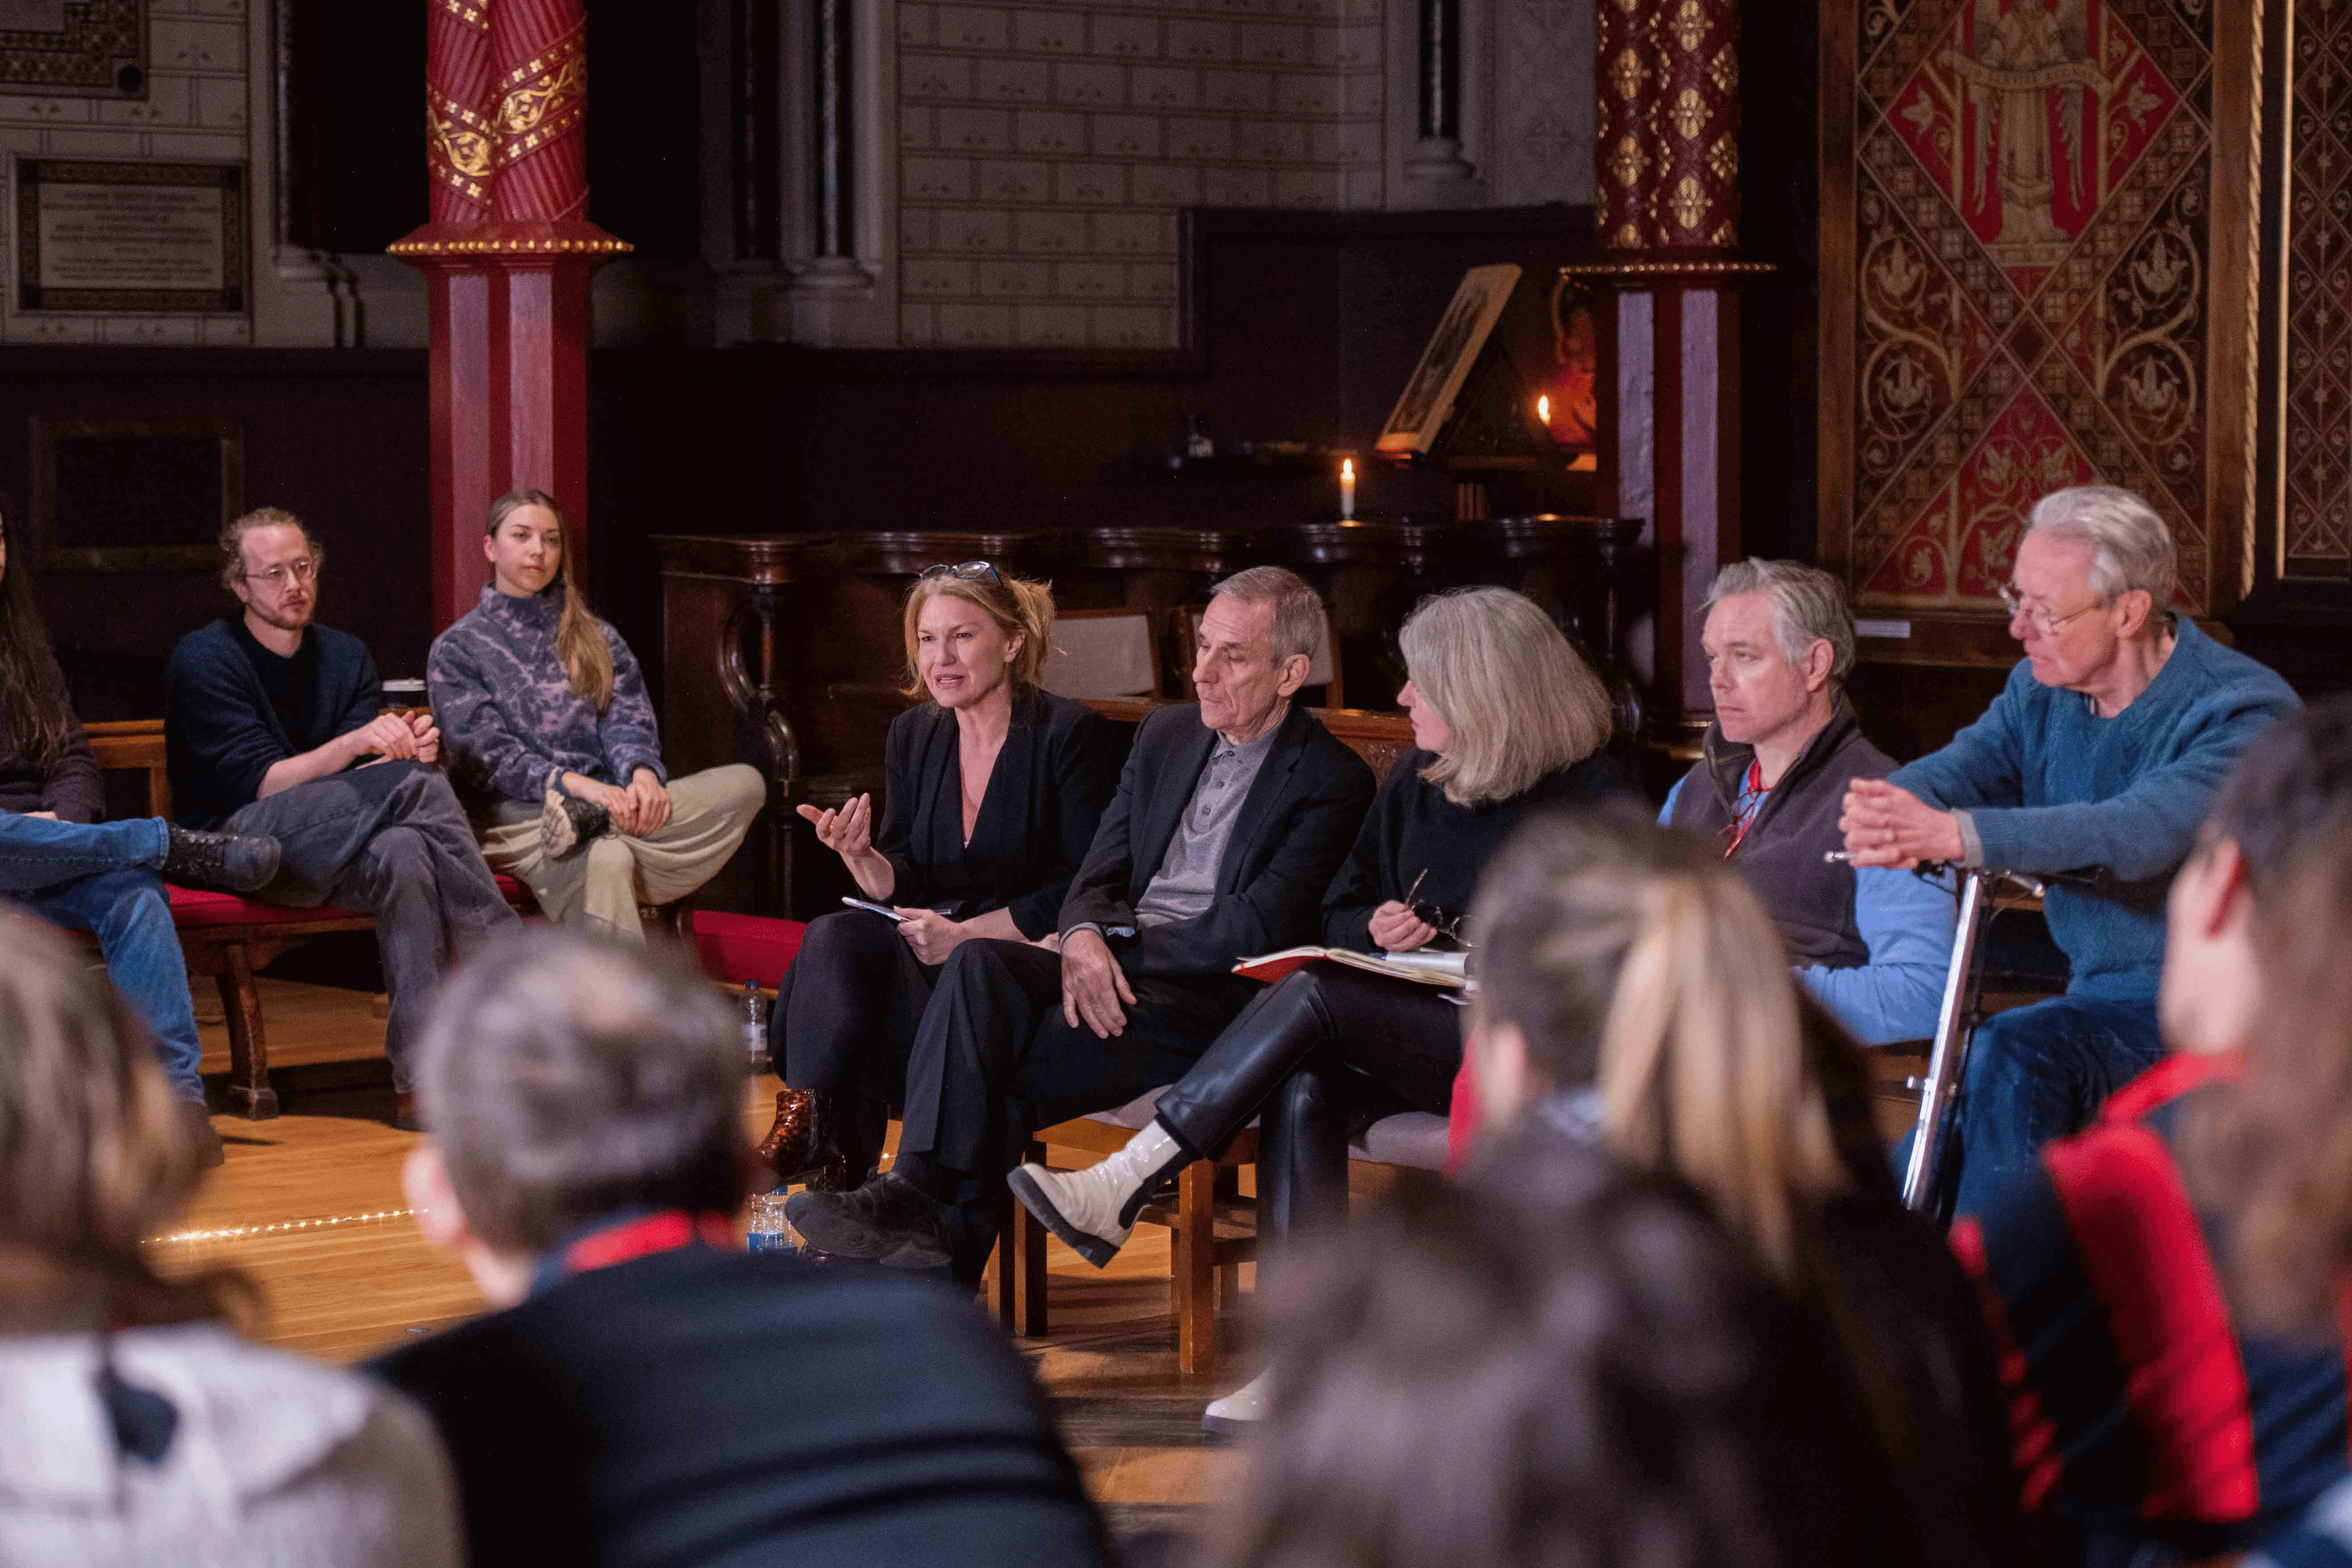 Panel discussion in King's Chapel